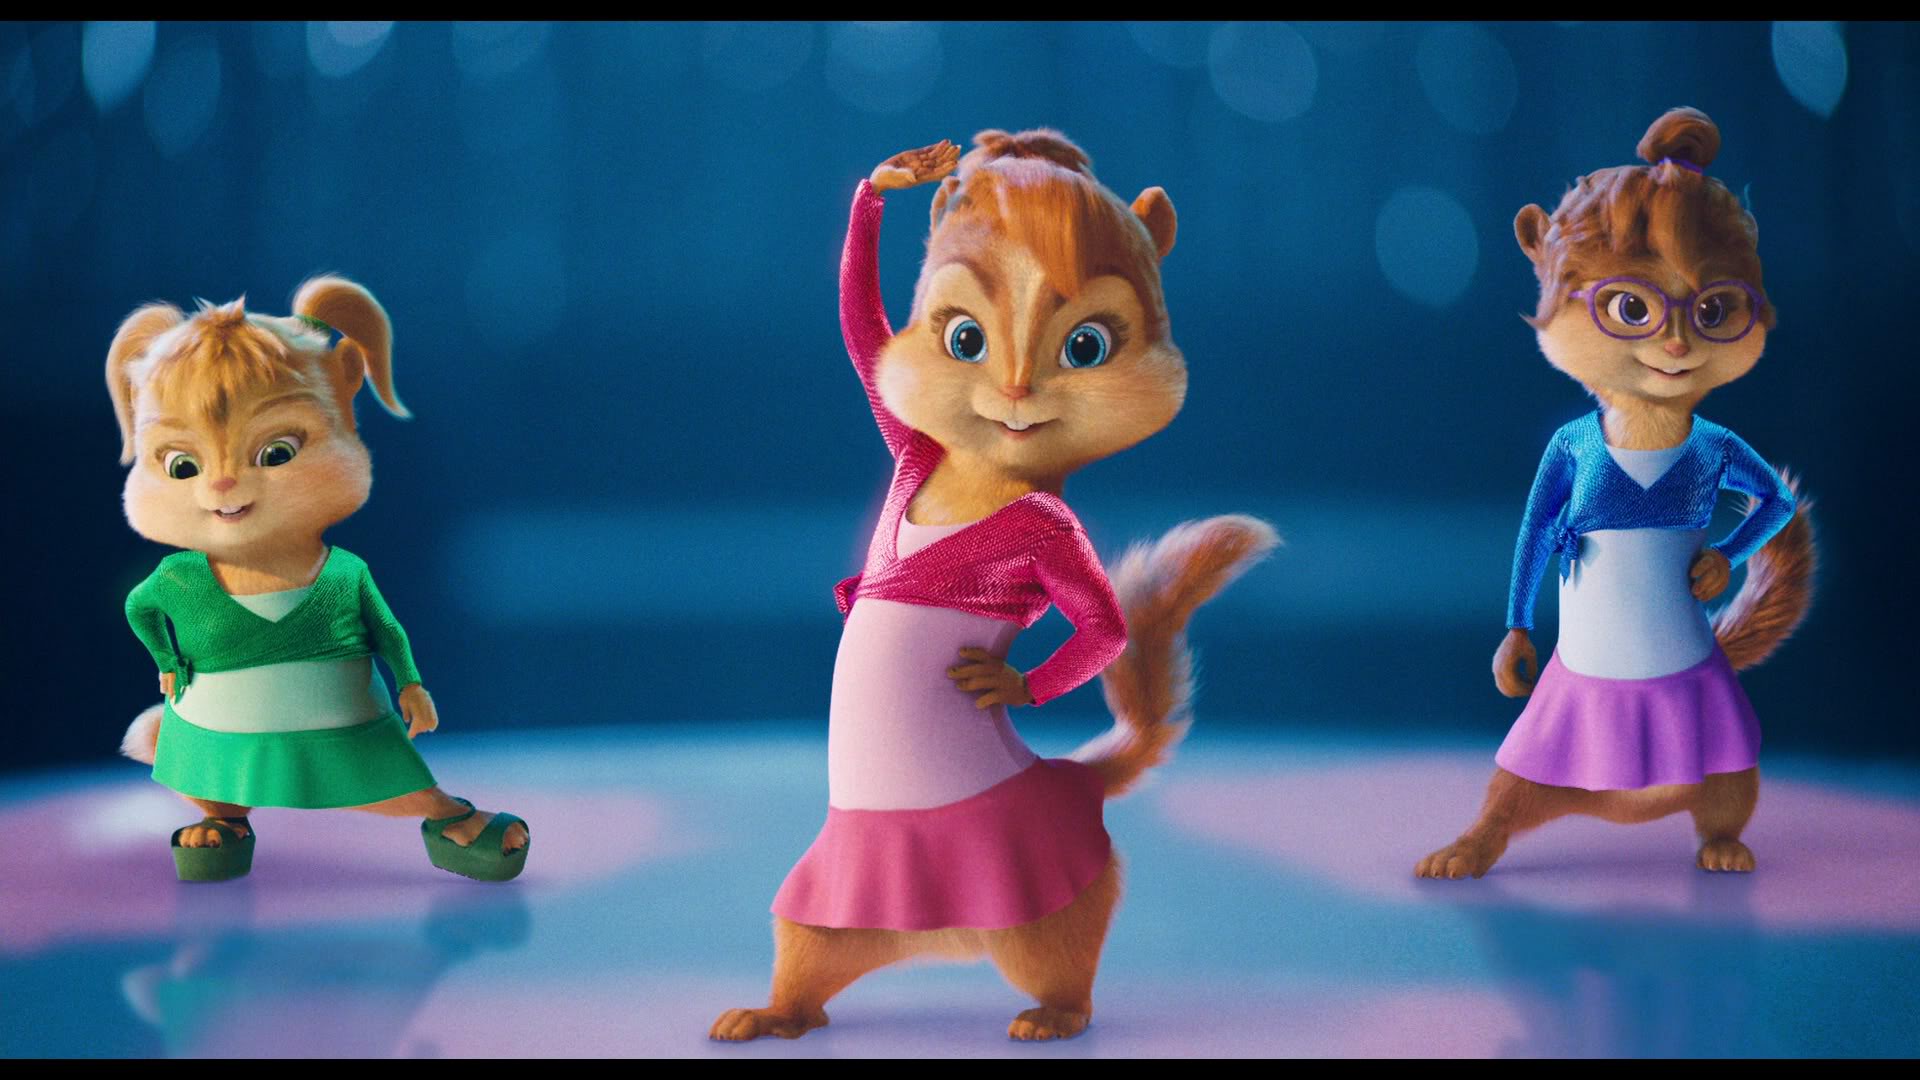 ẢNH CỦA PHIM Alvin and the Chipmunks: The Squeakquel.